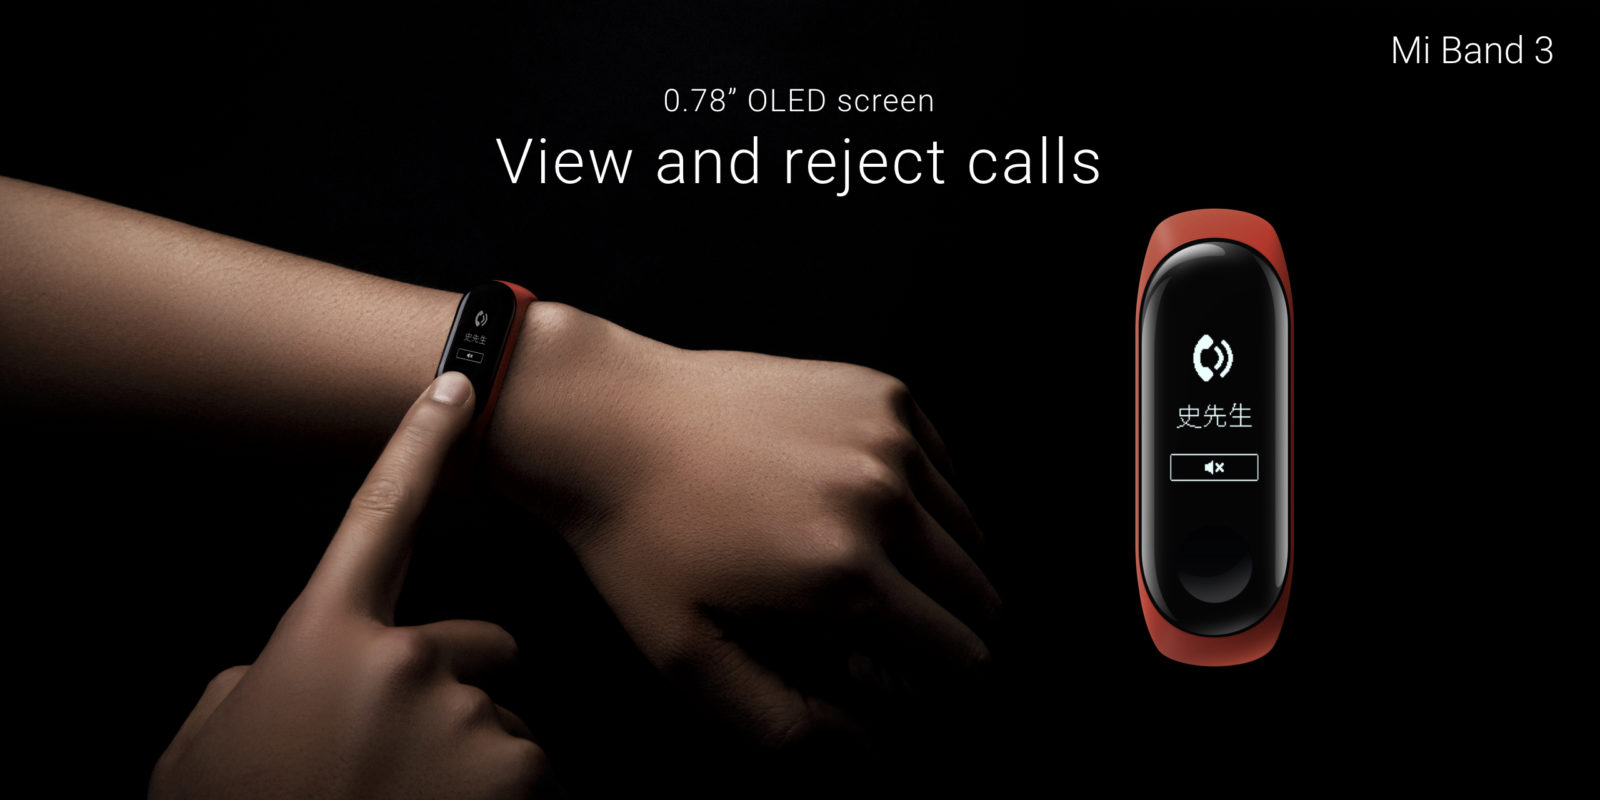 Mi Band 3 view call and reject